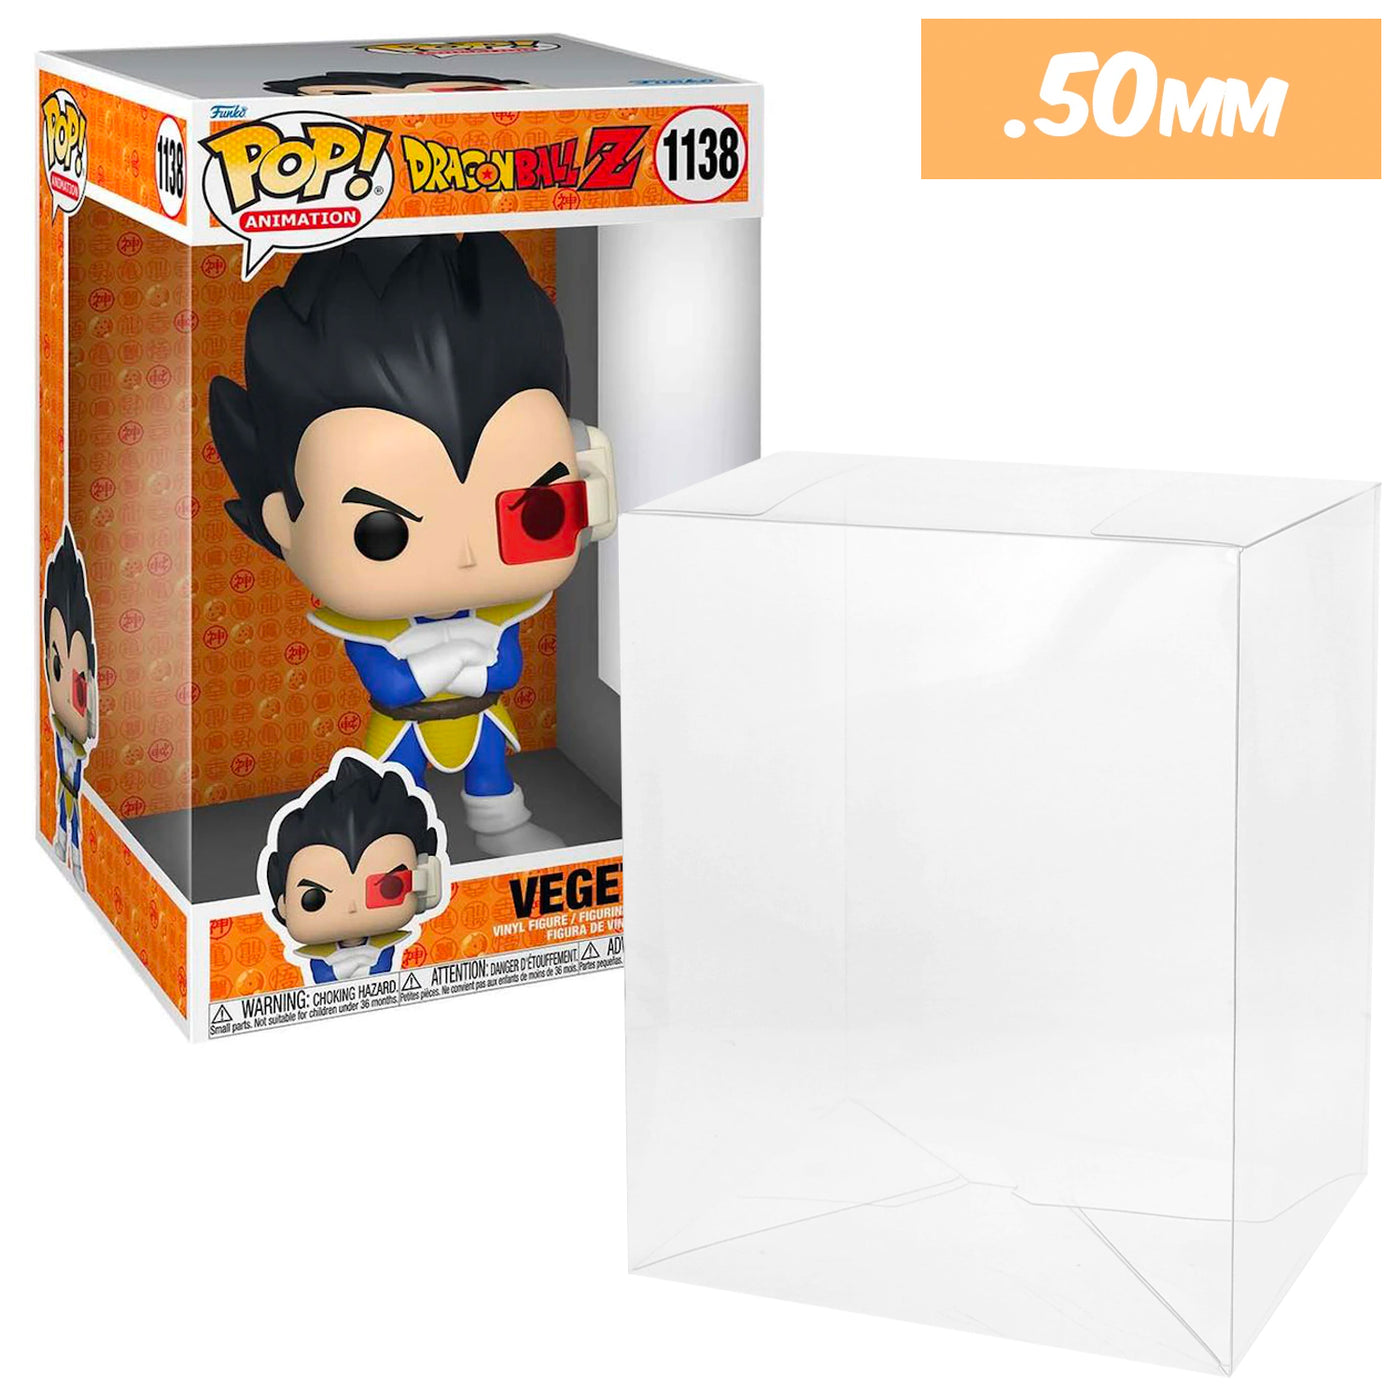 10 inch new size vegeta best funko pop protectors thick strong uv scratch flat top stack vinyl display geek plastic shield vaulted eco armor fits collect protect display case kollector protector